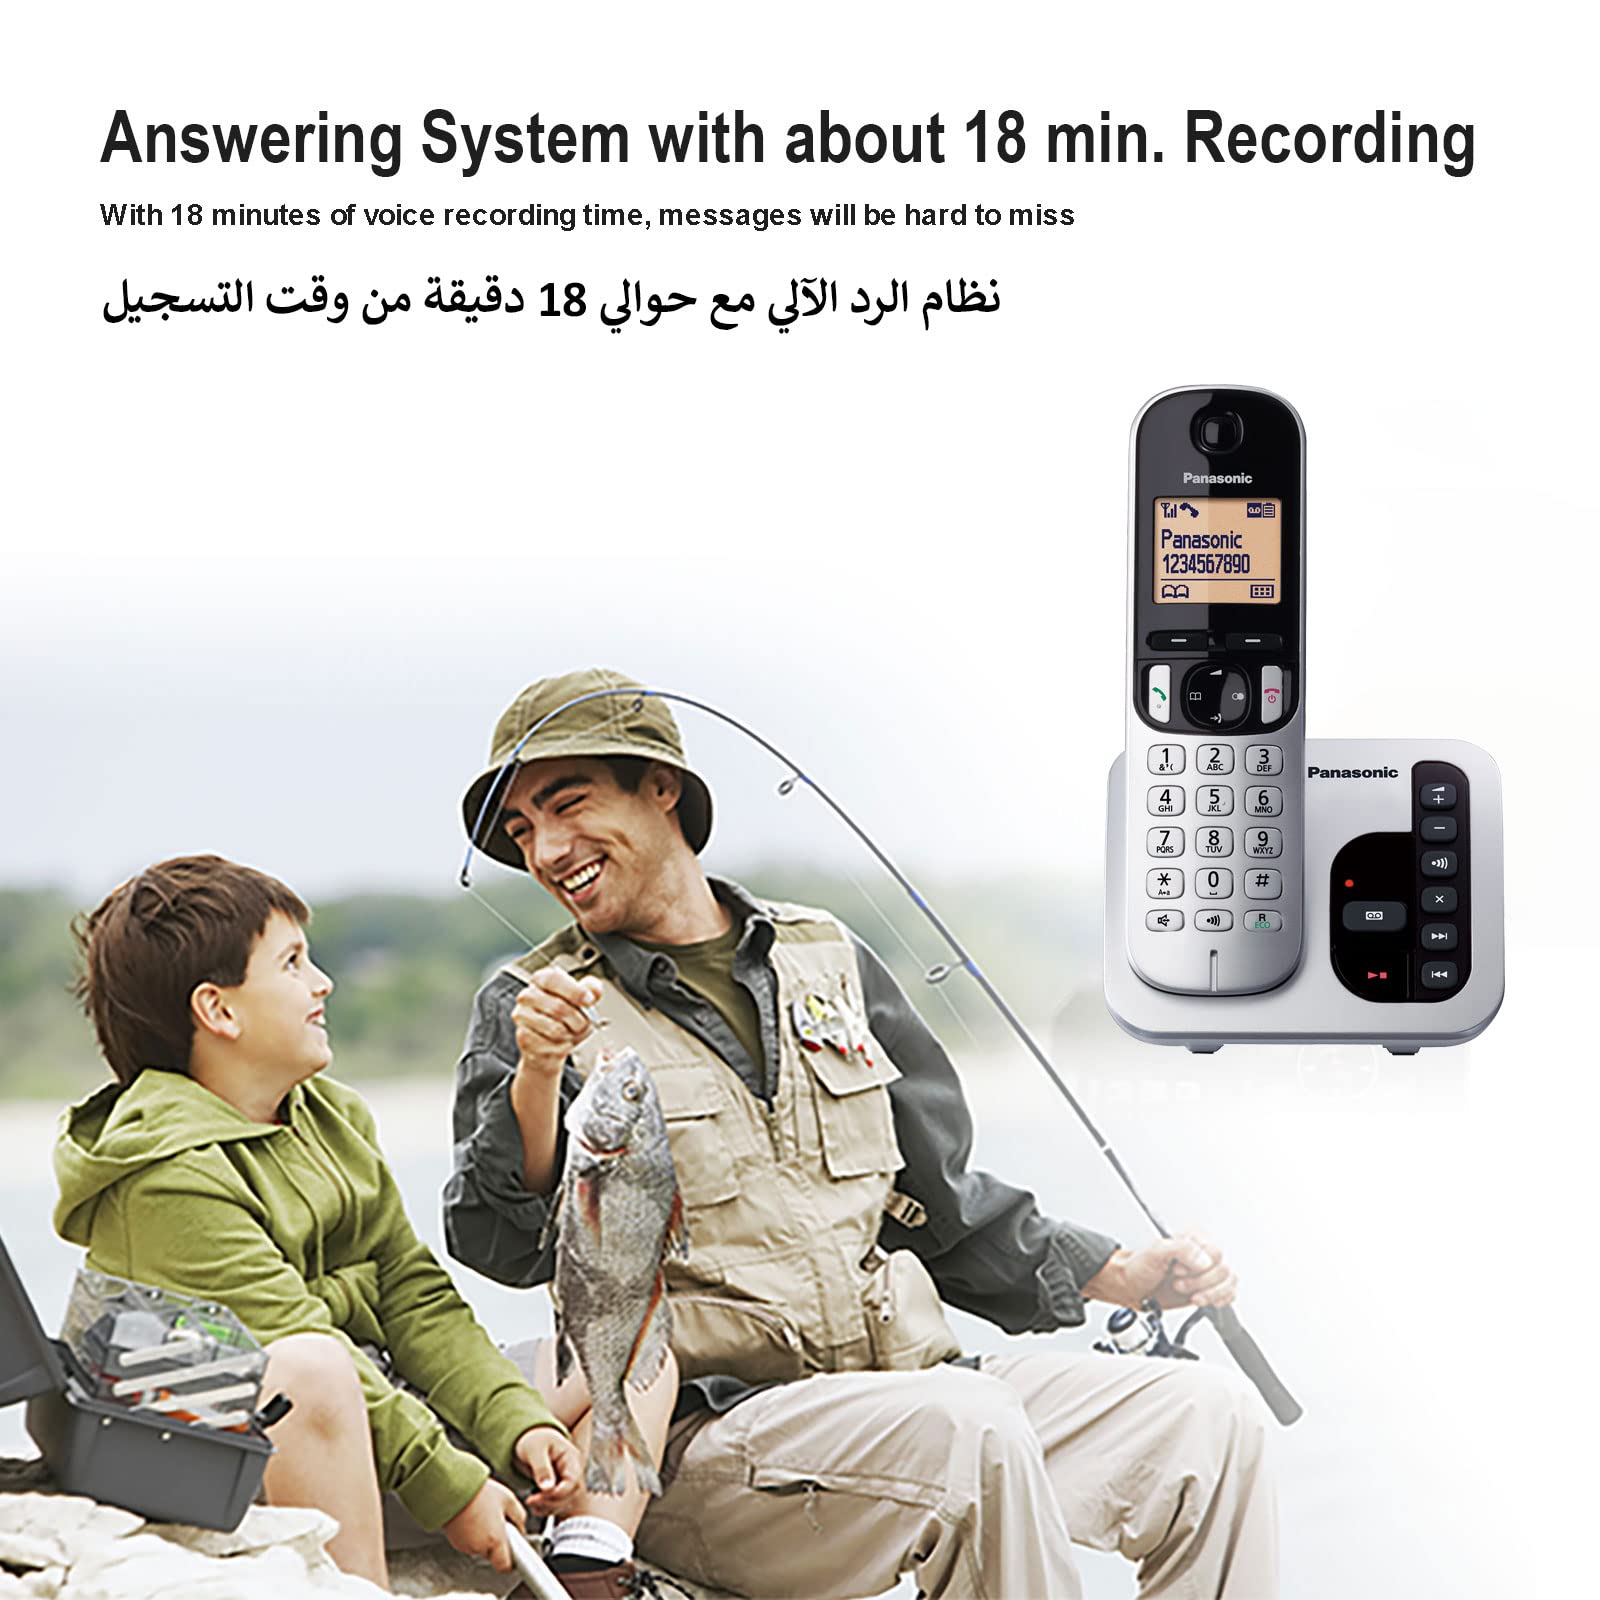 Panasonic DECT Cordless Phone with Digital Answering System, Nuisance Call Block, 1 Handset, UAE Certified - KX-TGC220UE1 (Silver)